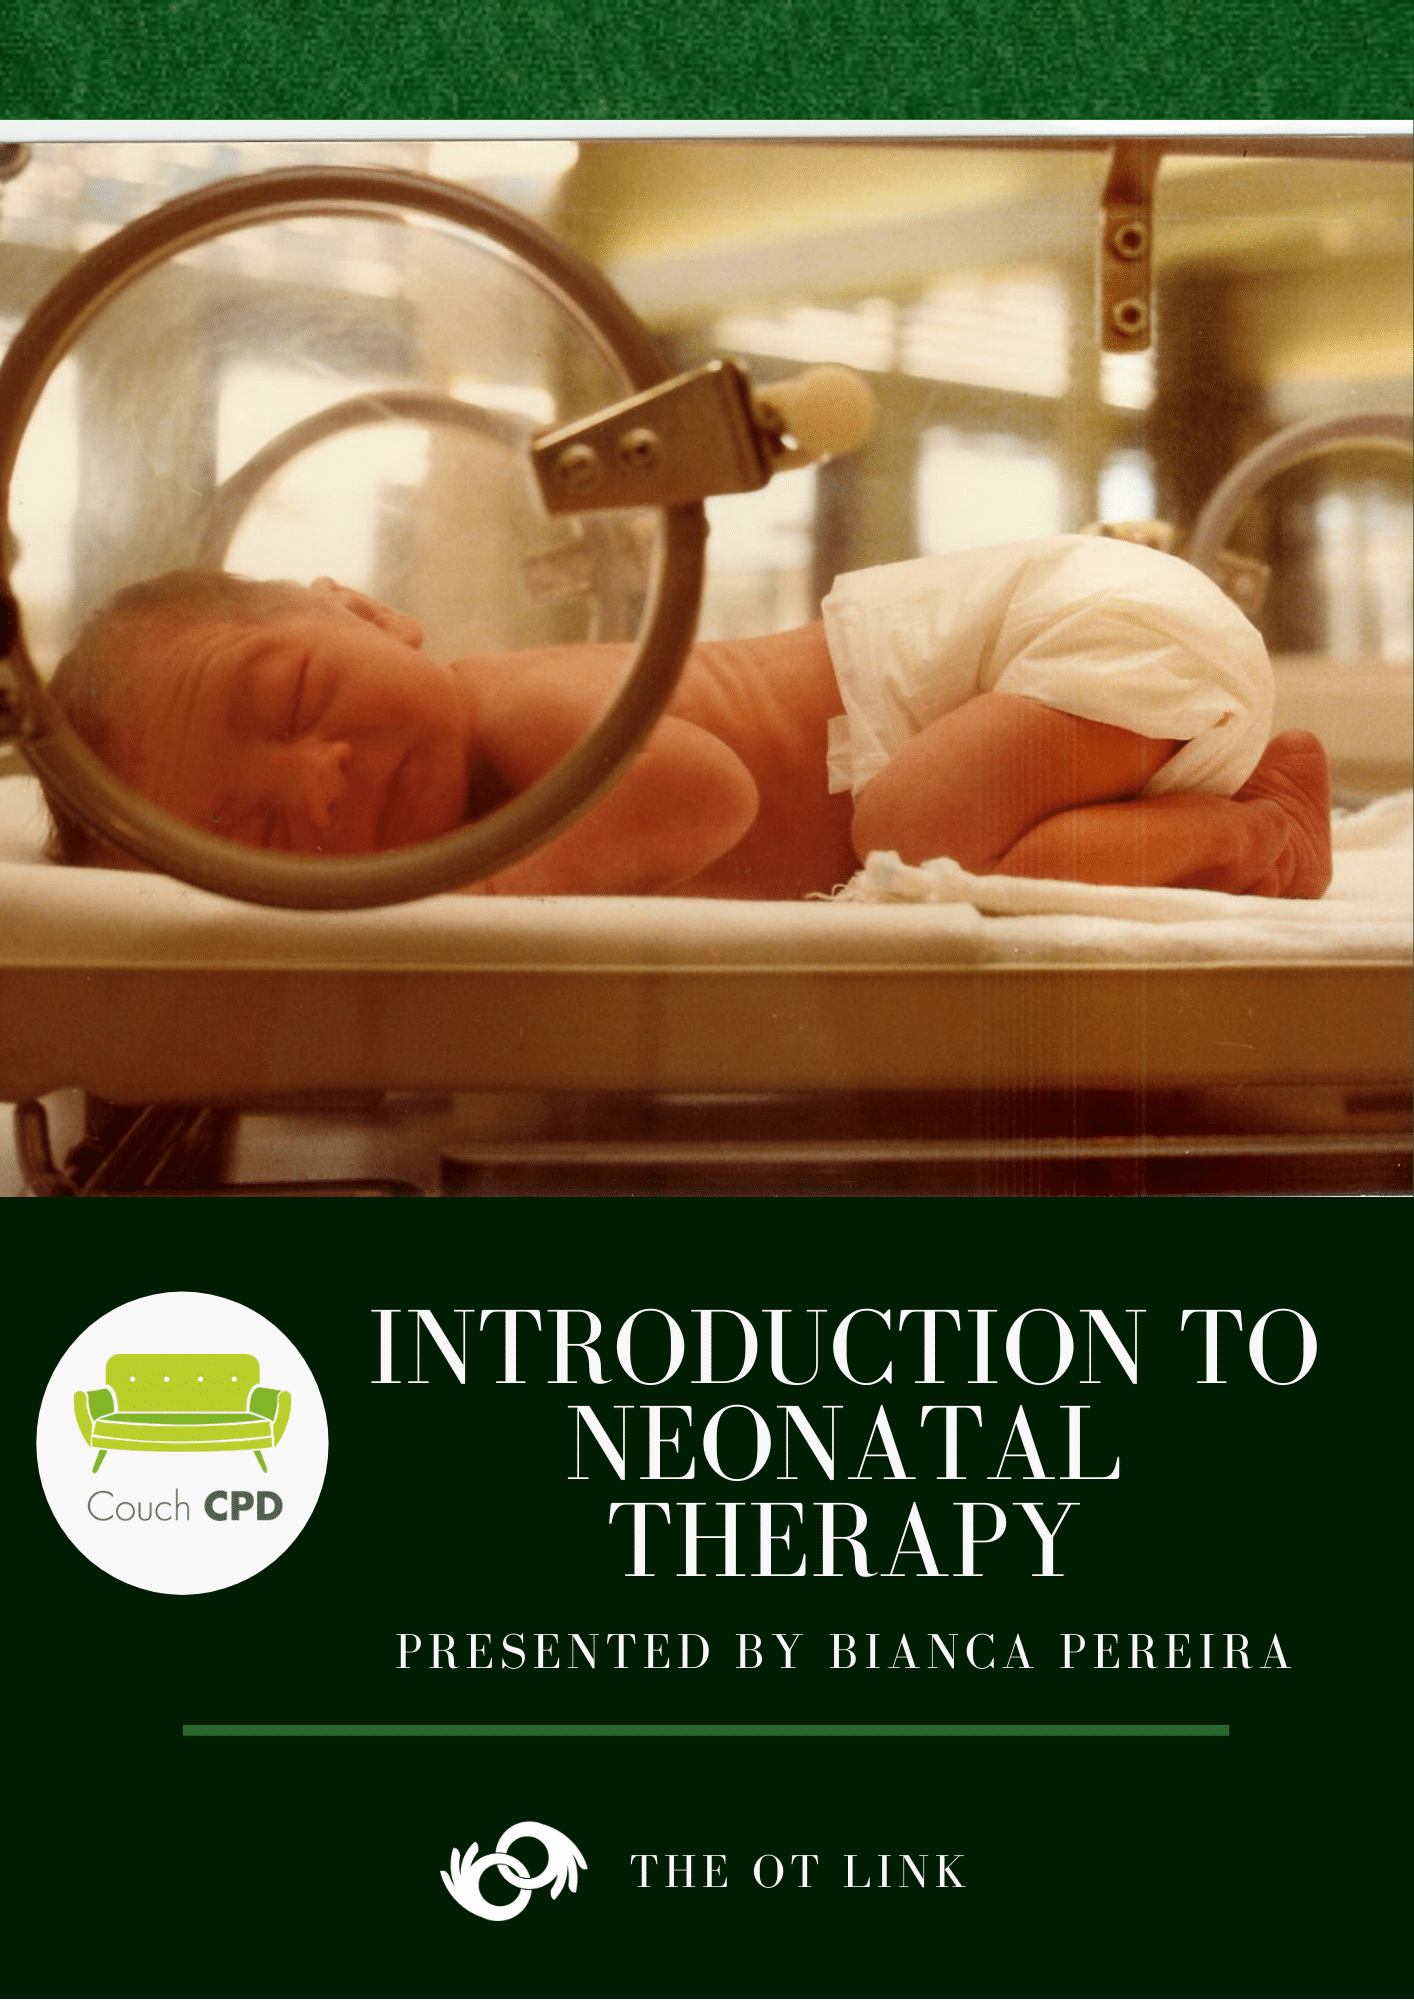 Introduction to Neonatal Therapy 2021 The OT Link